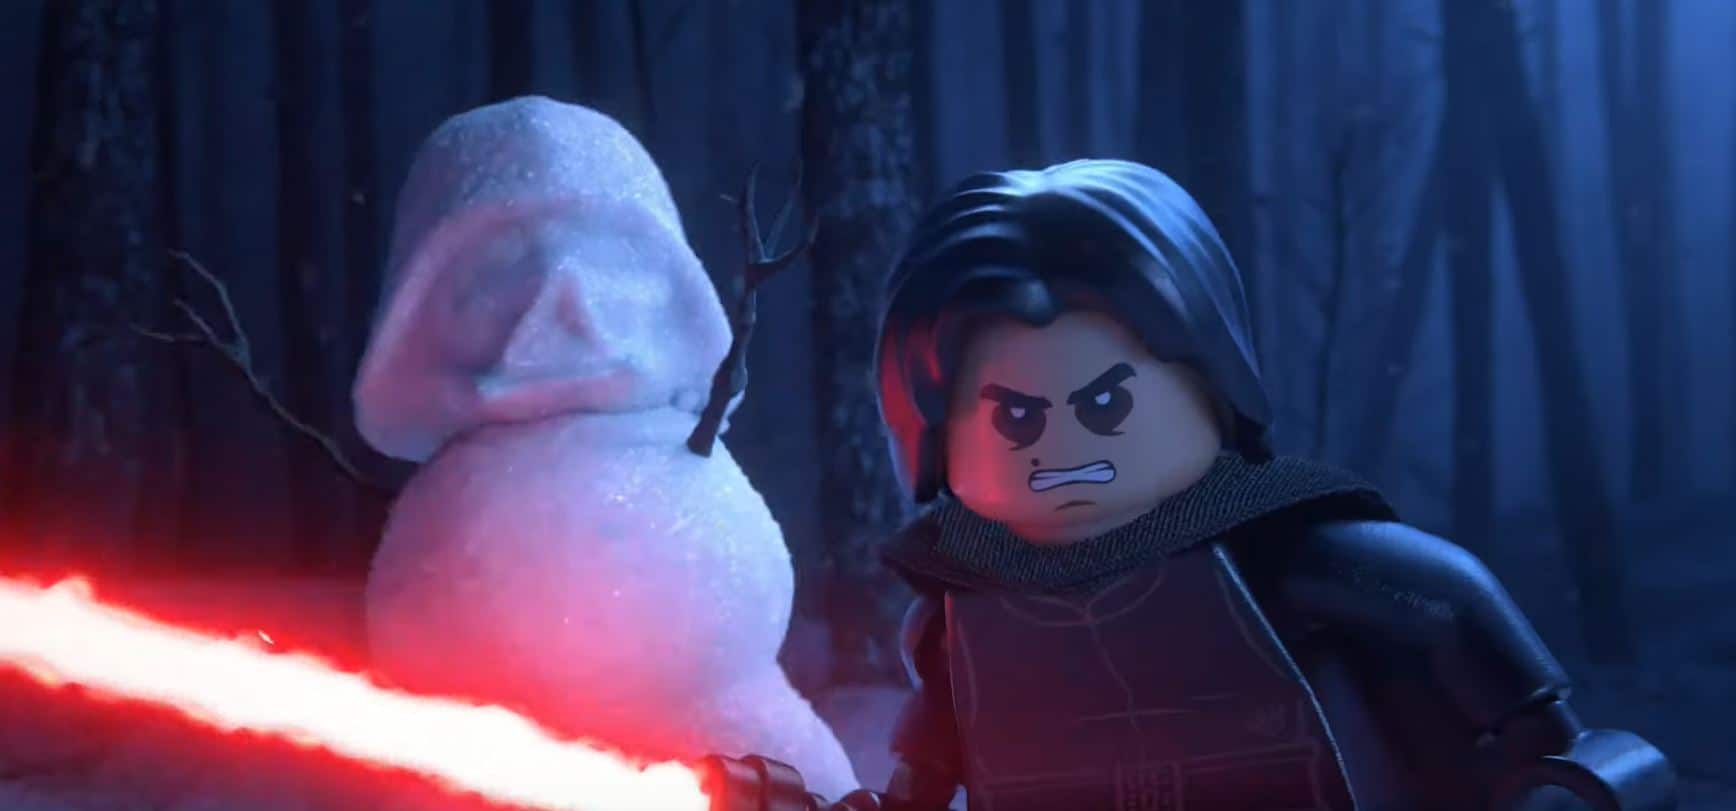 LEGO Star Wars: The Skywalker Saga includes all nine episodes in one collection